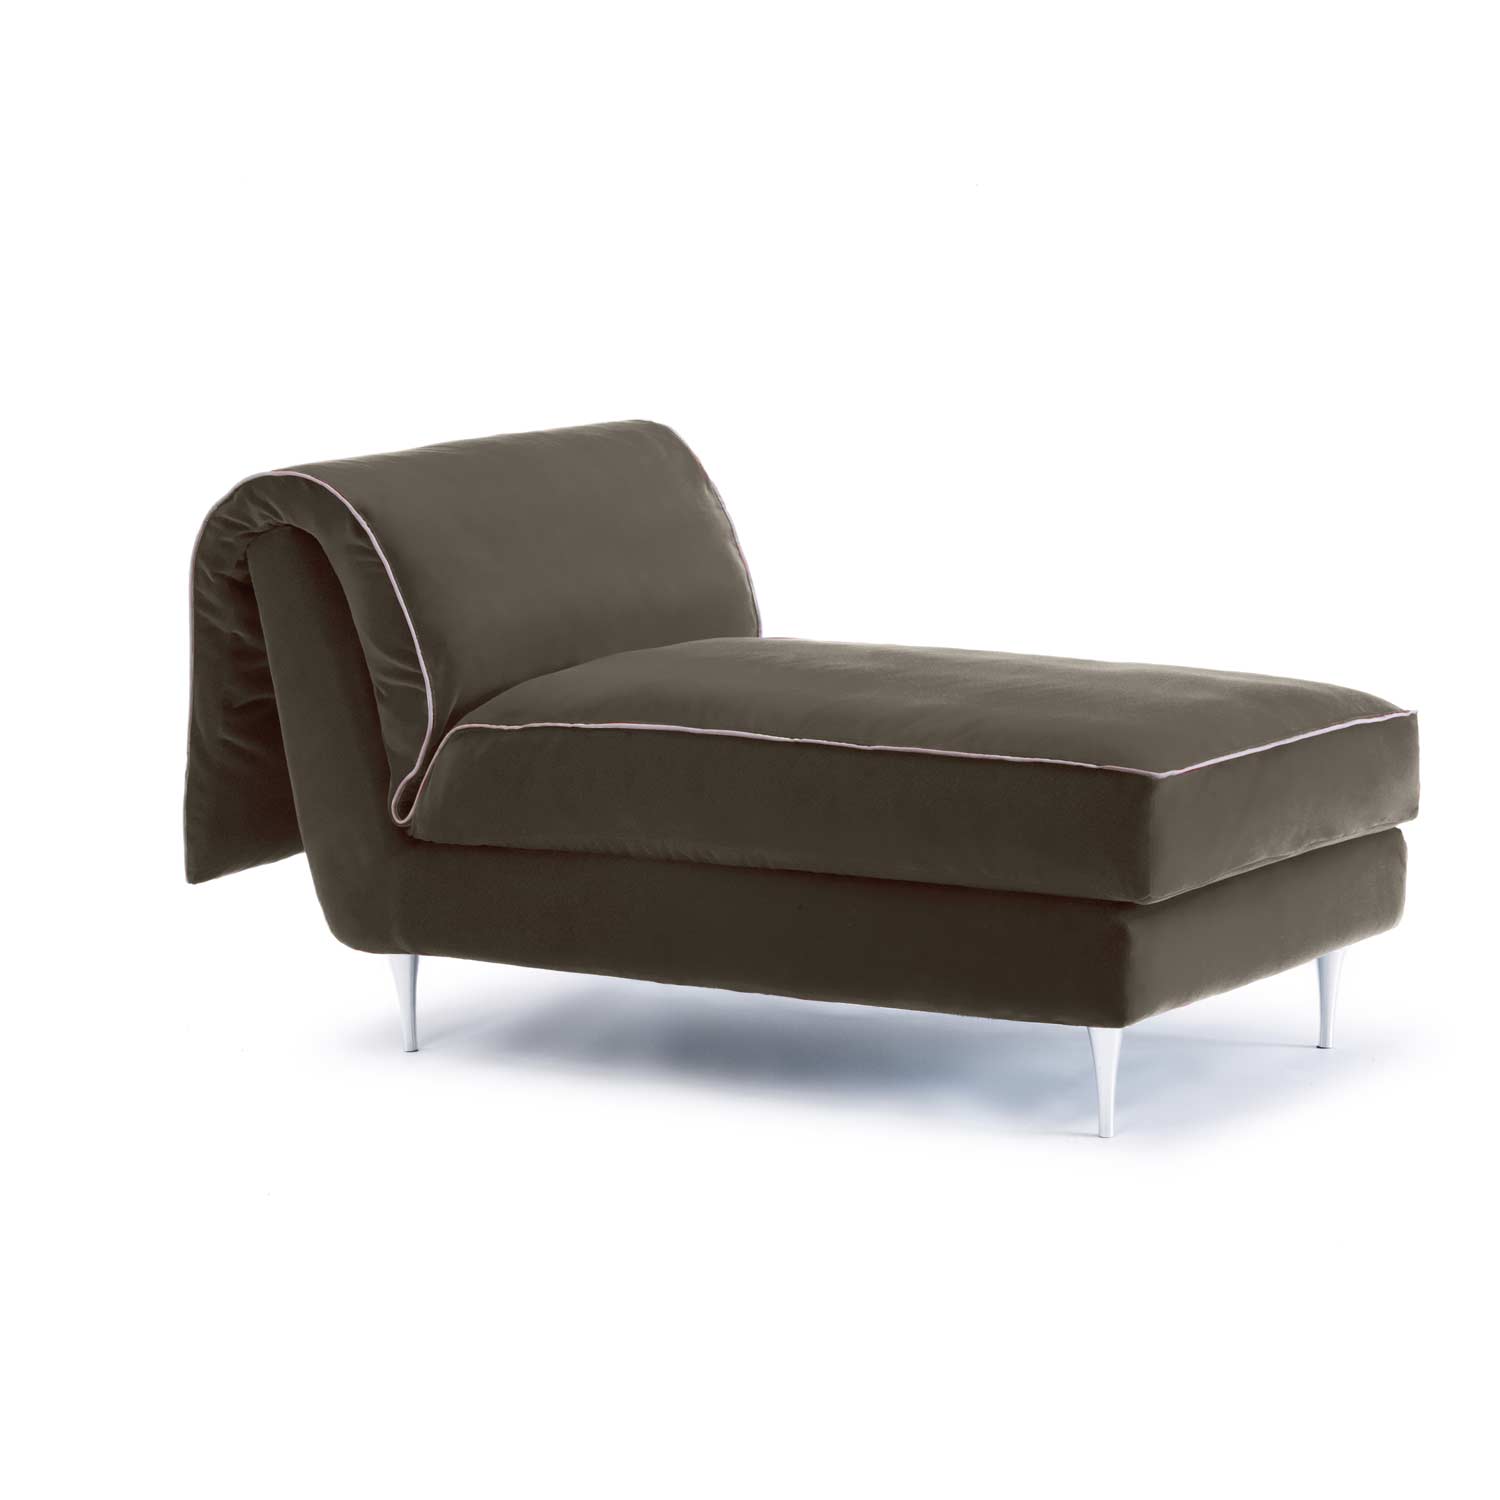 Eco-Friendly Upholstered Daybed - grey velvet chaiselongue